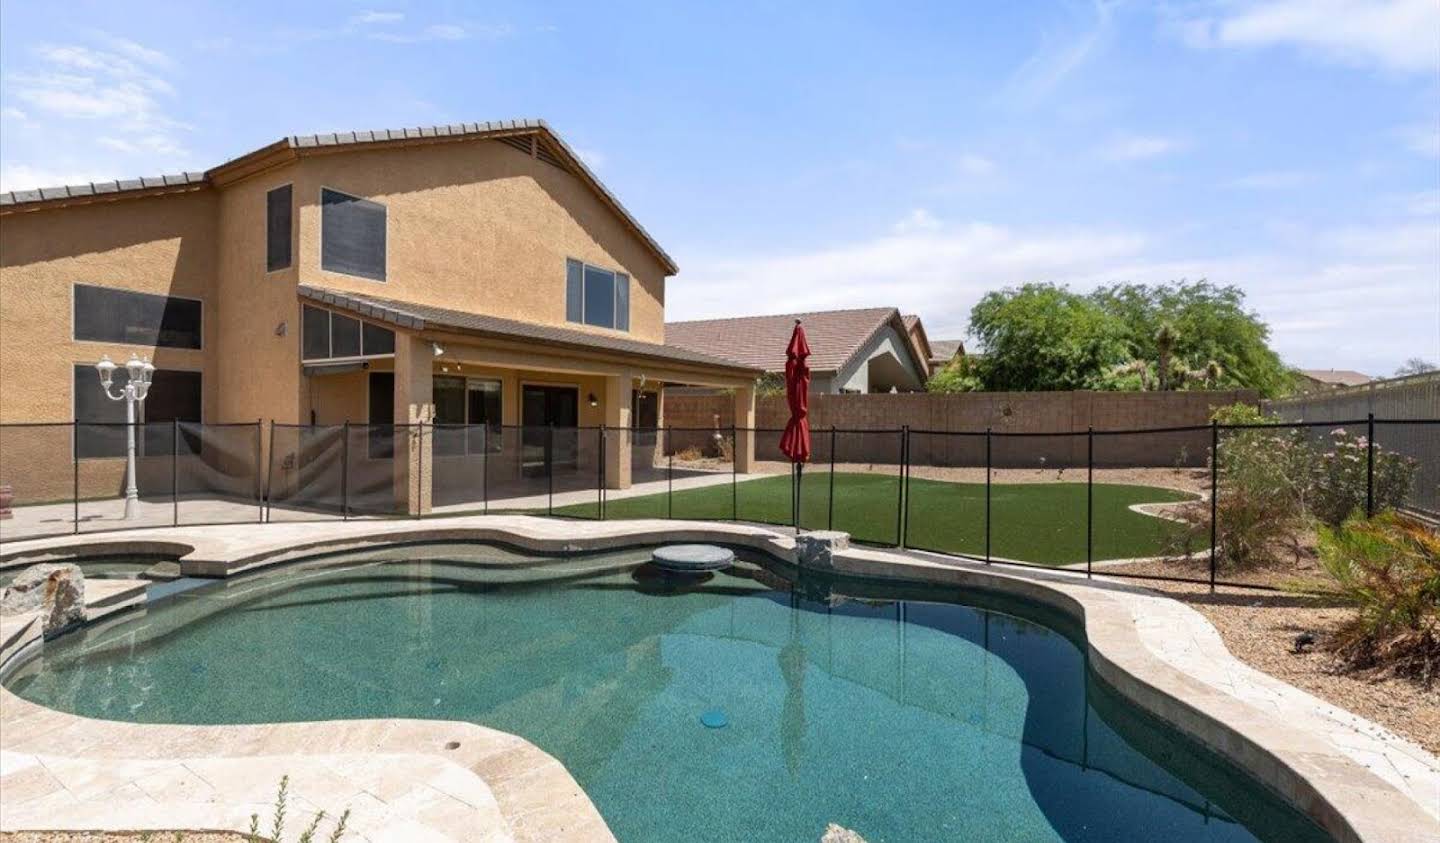 House with pool Cave Creek